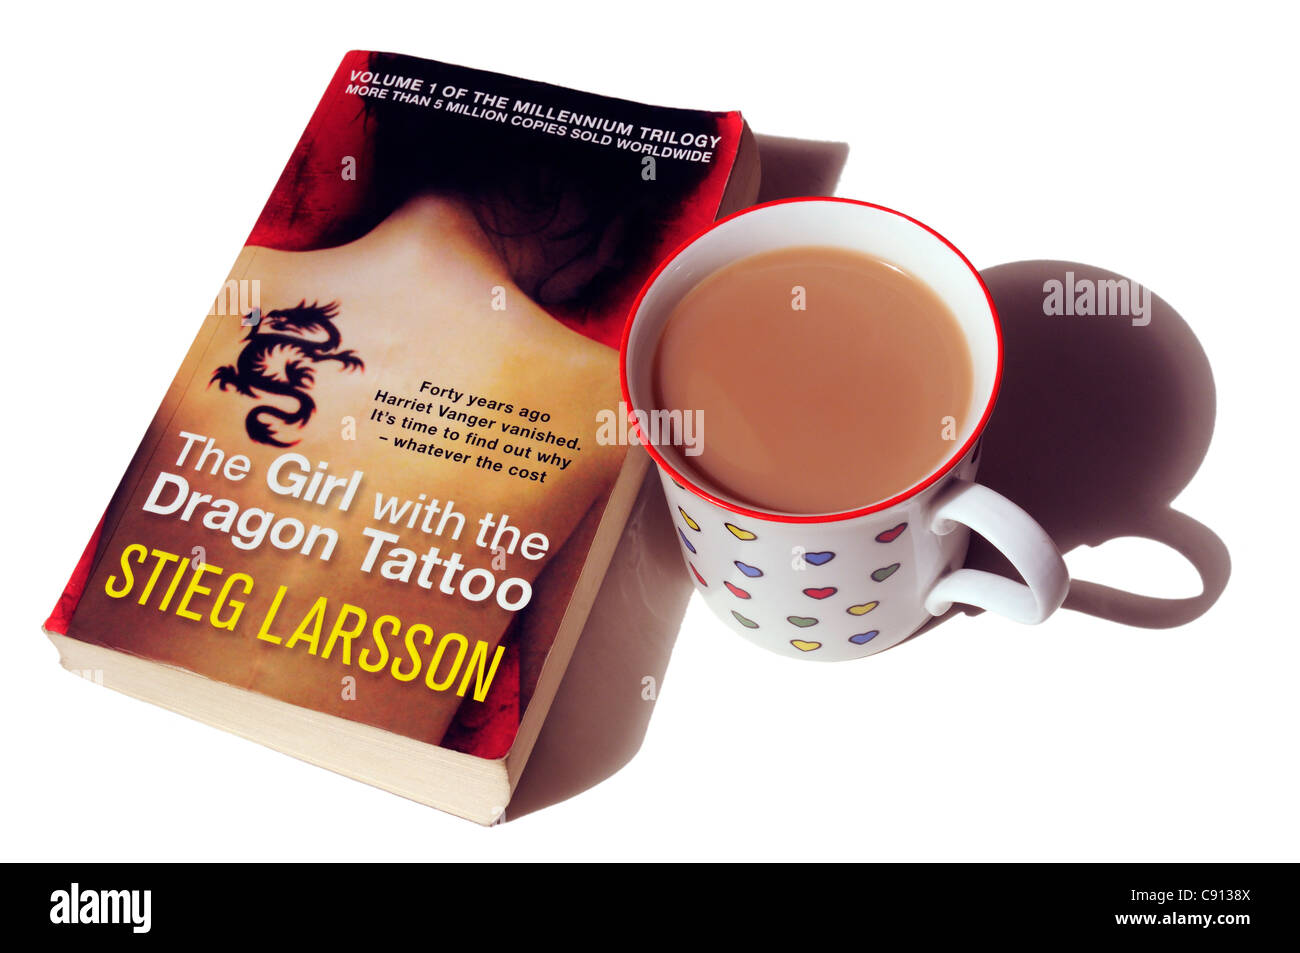 The Girl with the Dragon Tattoo by Steig Larsson Stock Photo